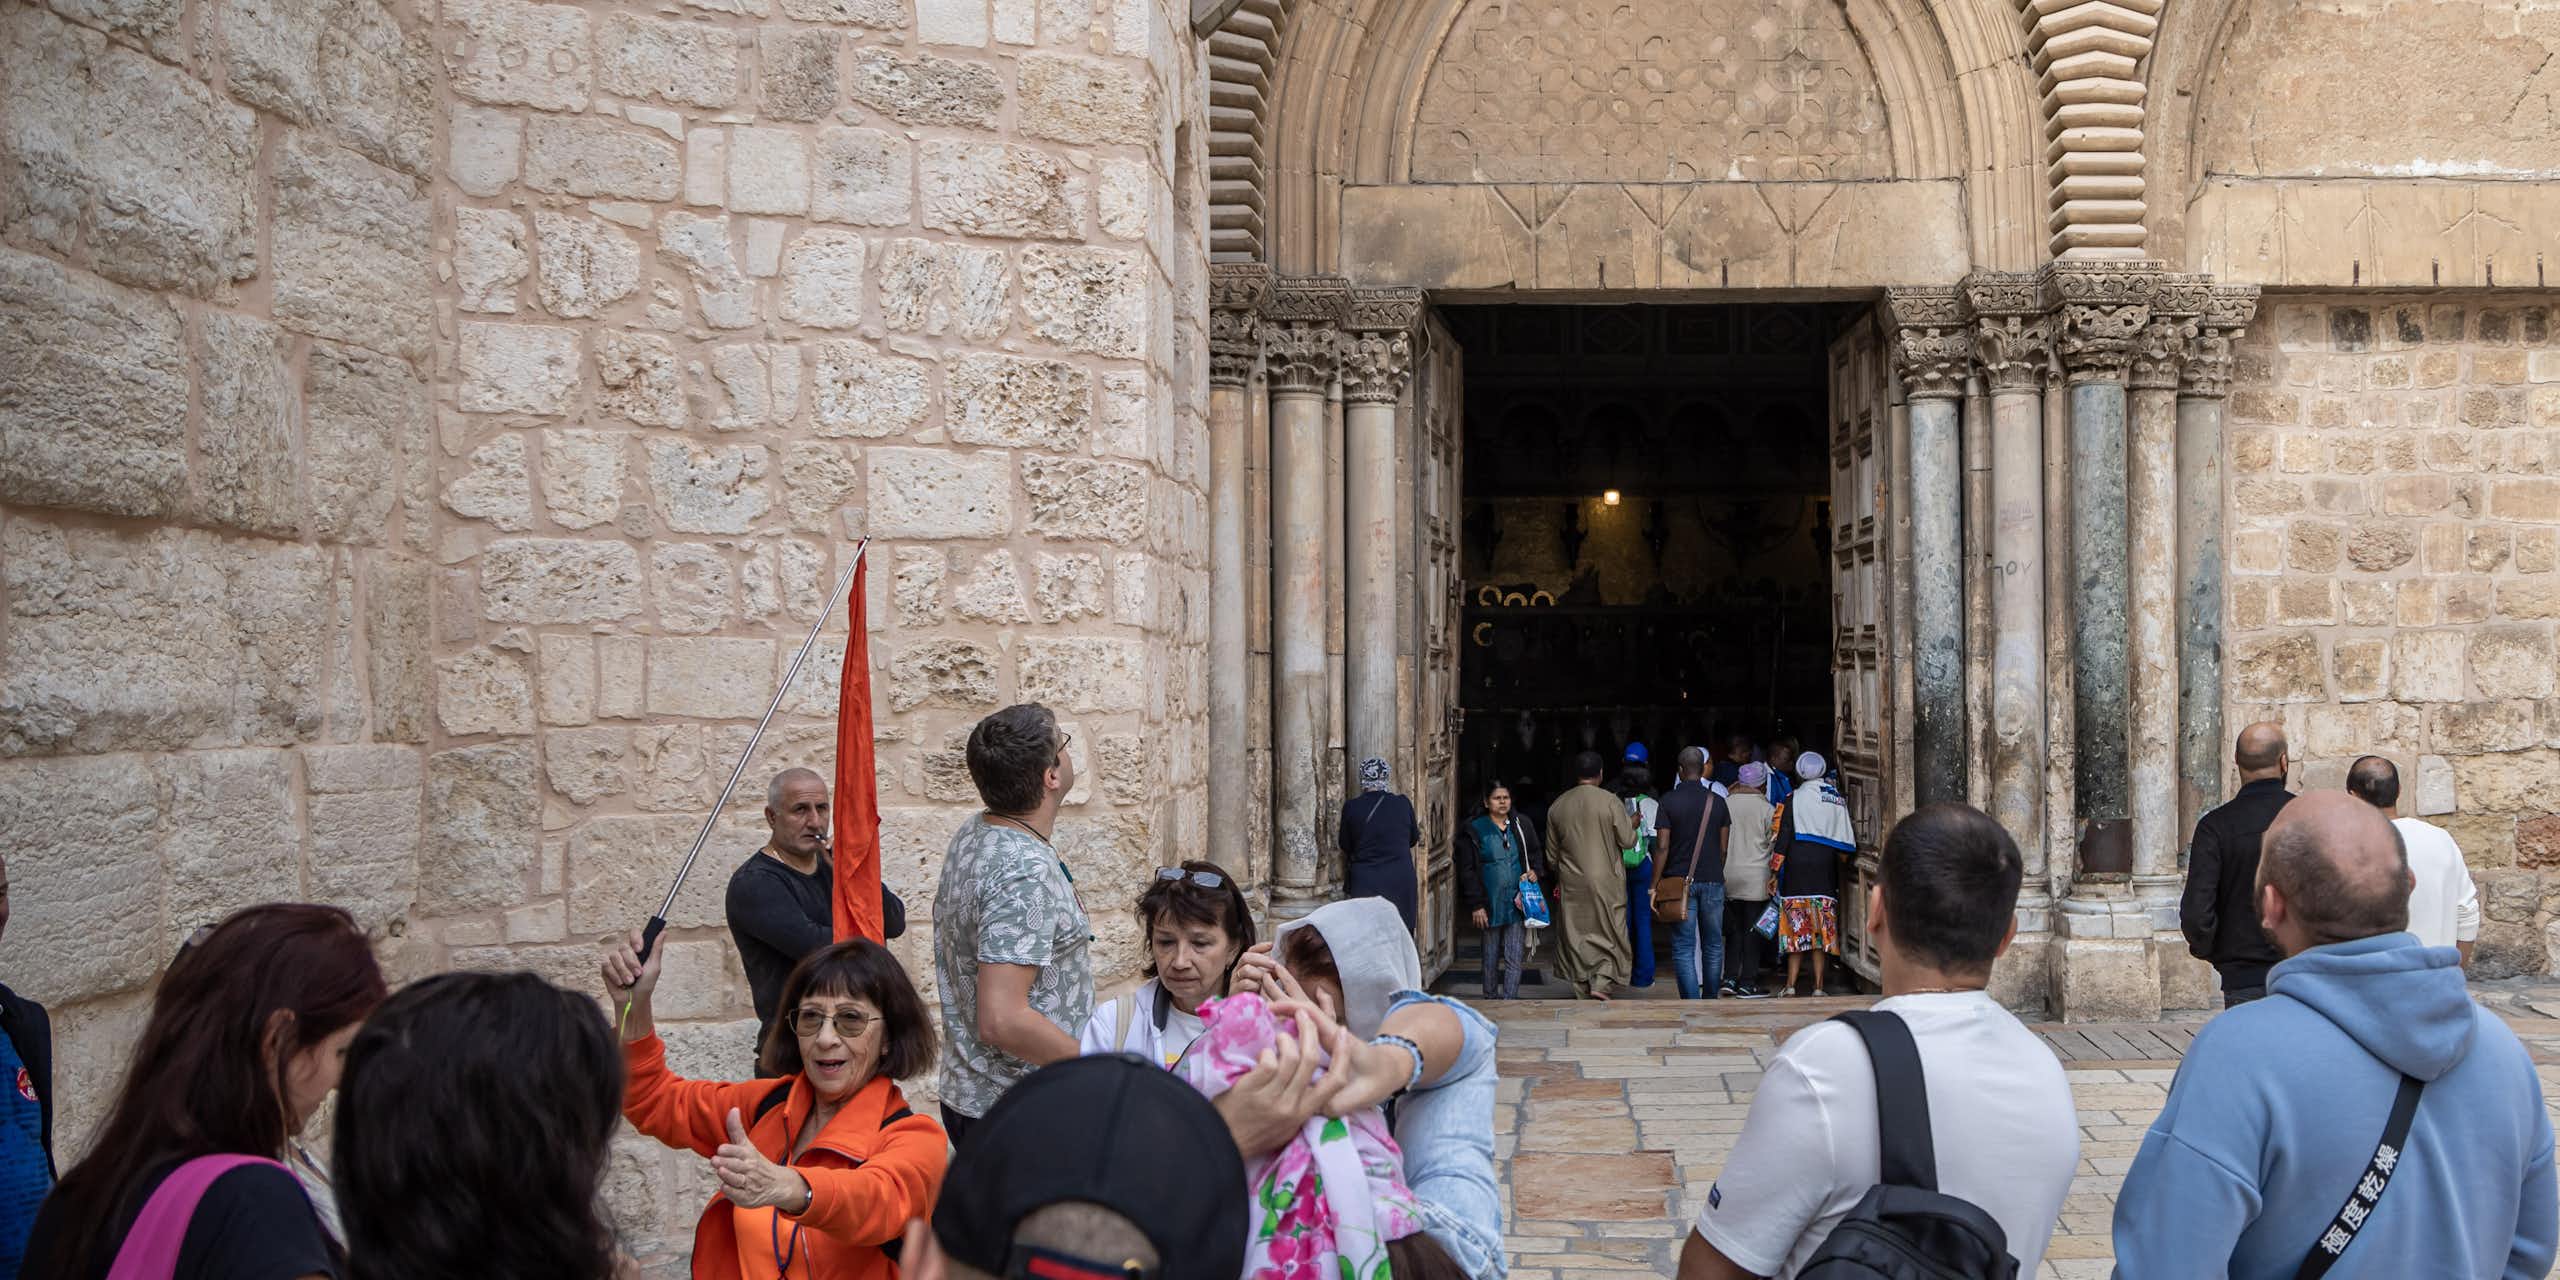 A crowd of tourists entering an old church.